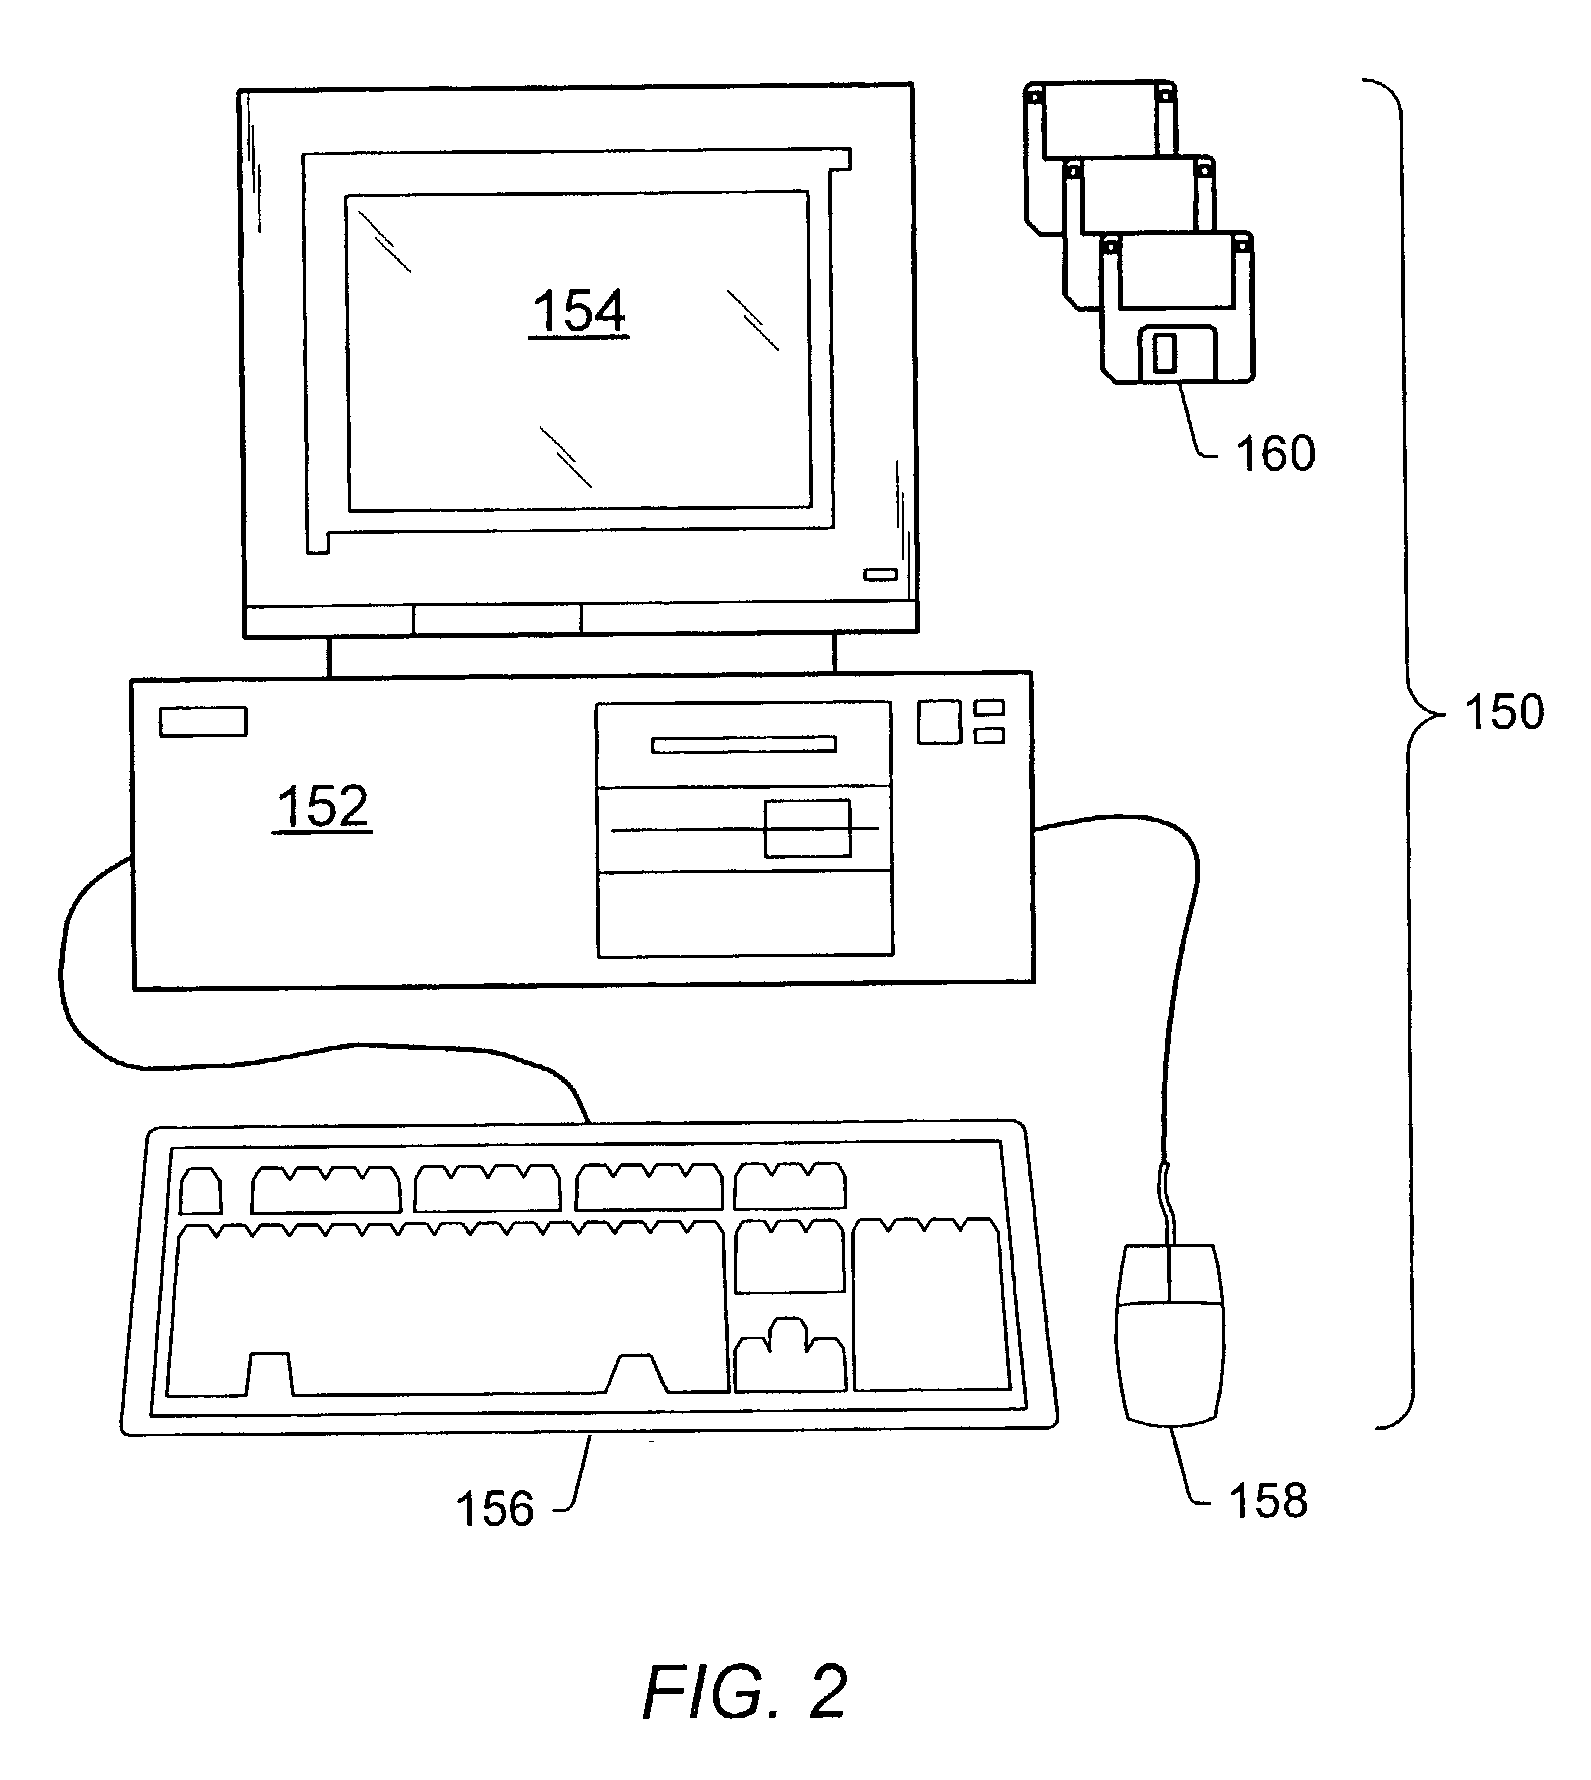 Computerized method and system for estimating an effect on liability based on the stopping distance of vehicles